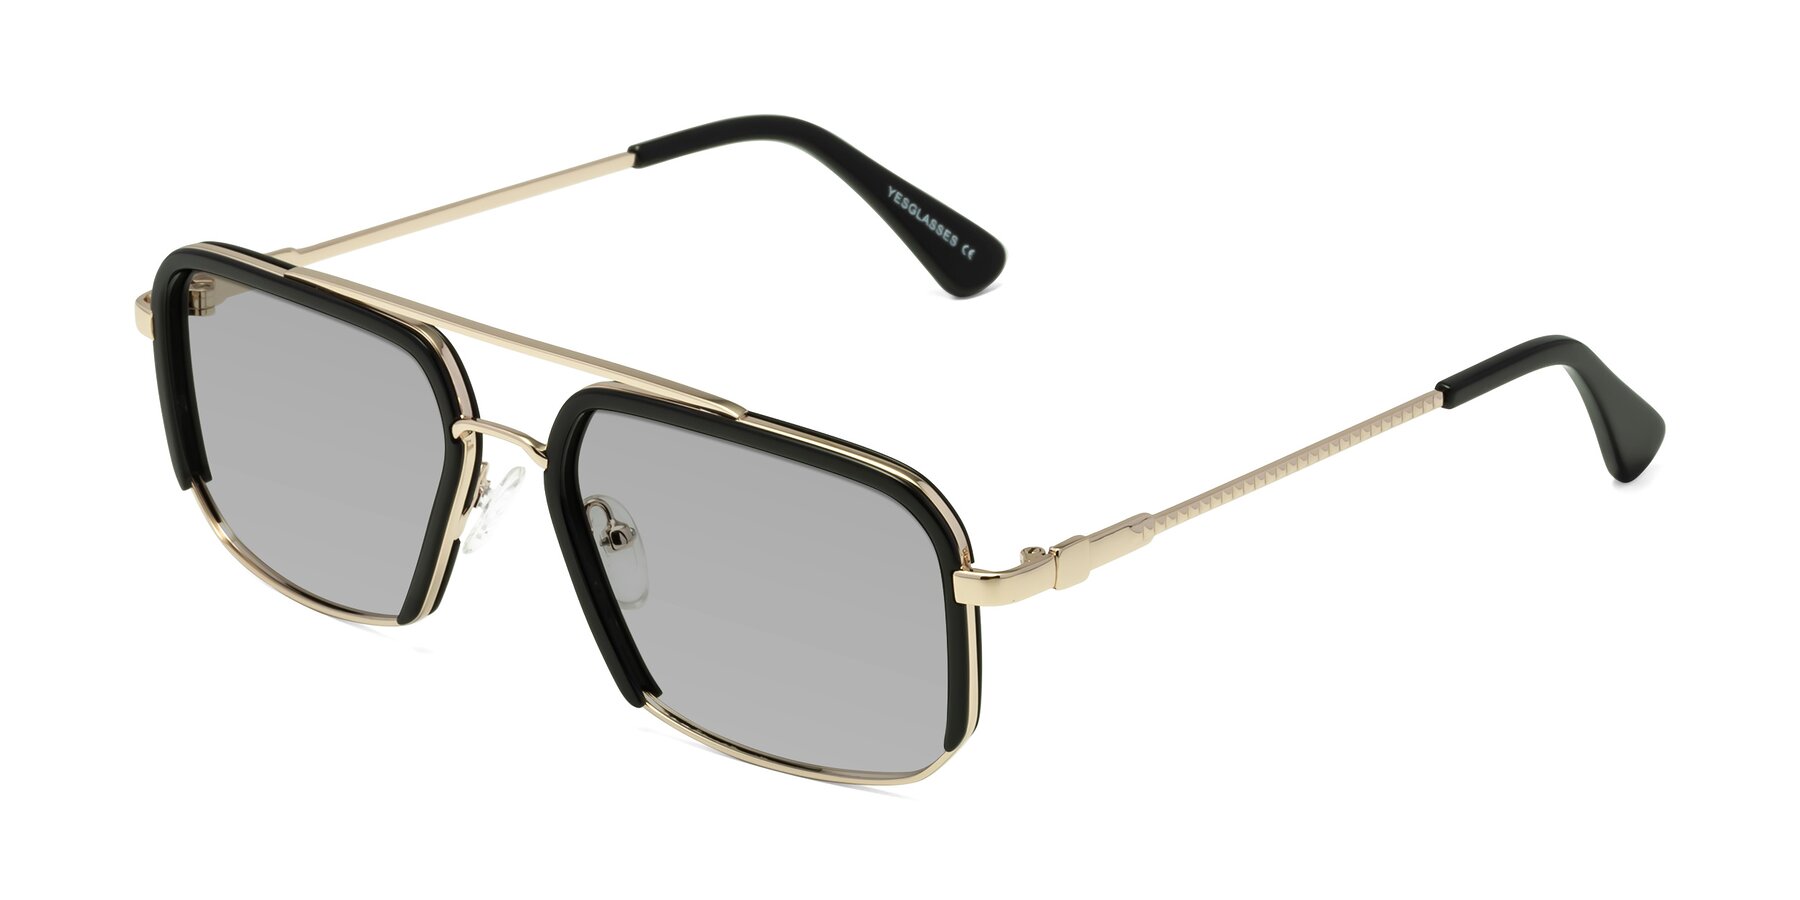 Angle of Dechter in Black-Gold with Light Gray Tinted Lenses